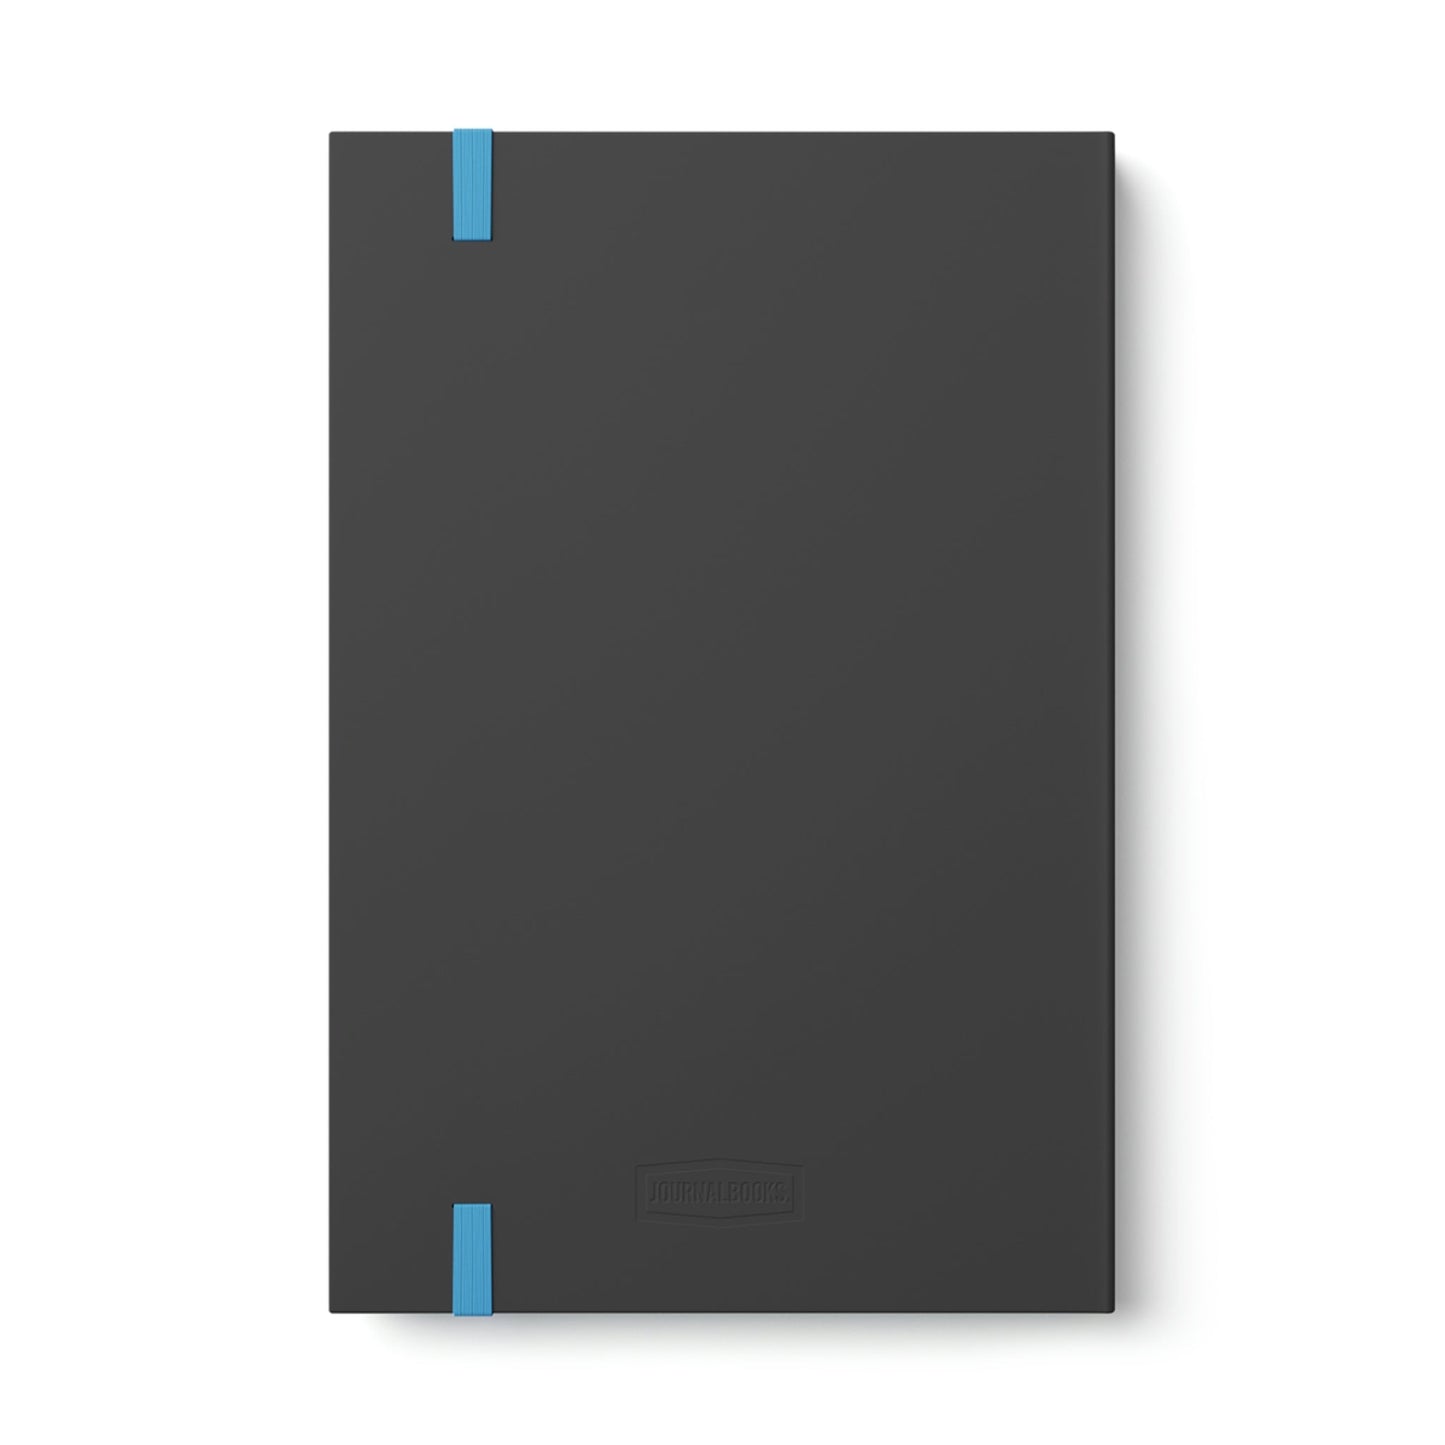 Elephant "Great Thoughts, Good Memories" Color Contrast Notebook Journal - Ruled